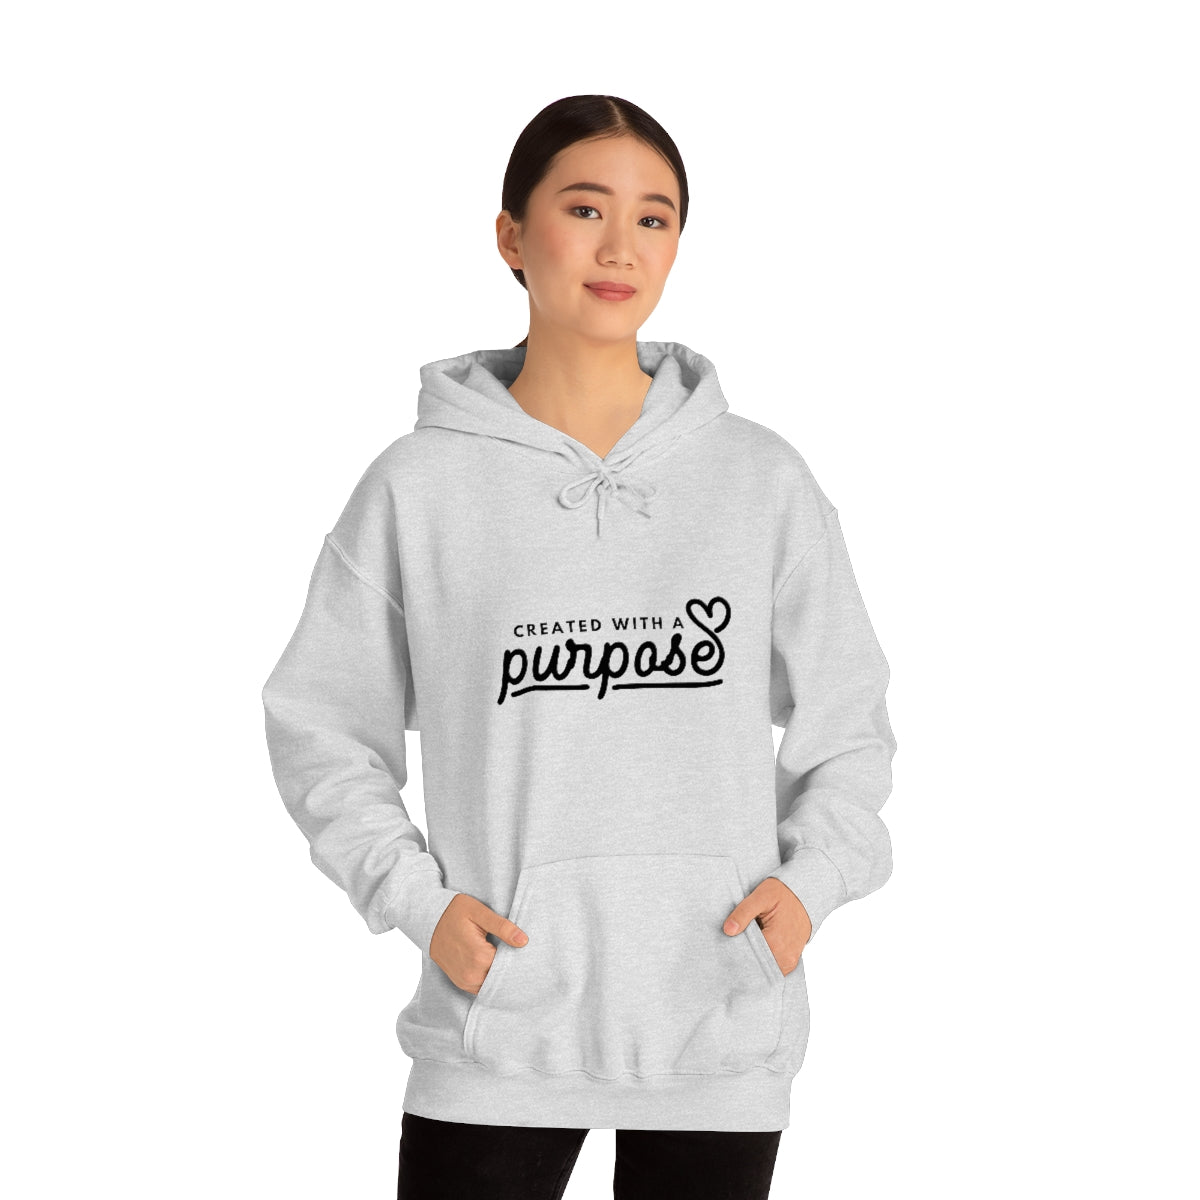 Created With a Purpose Unisex Heavy Blend™ Hooded Sweatshirt